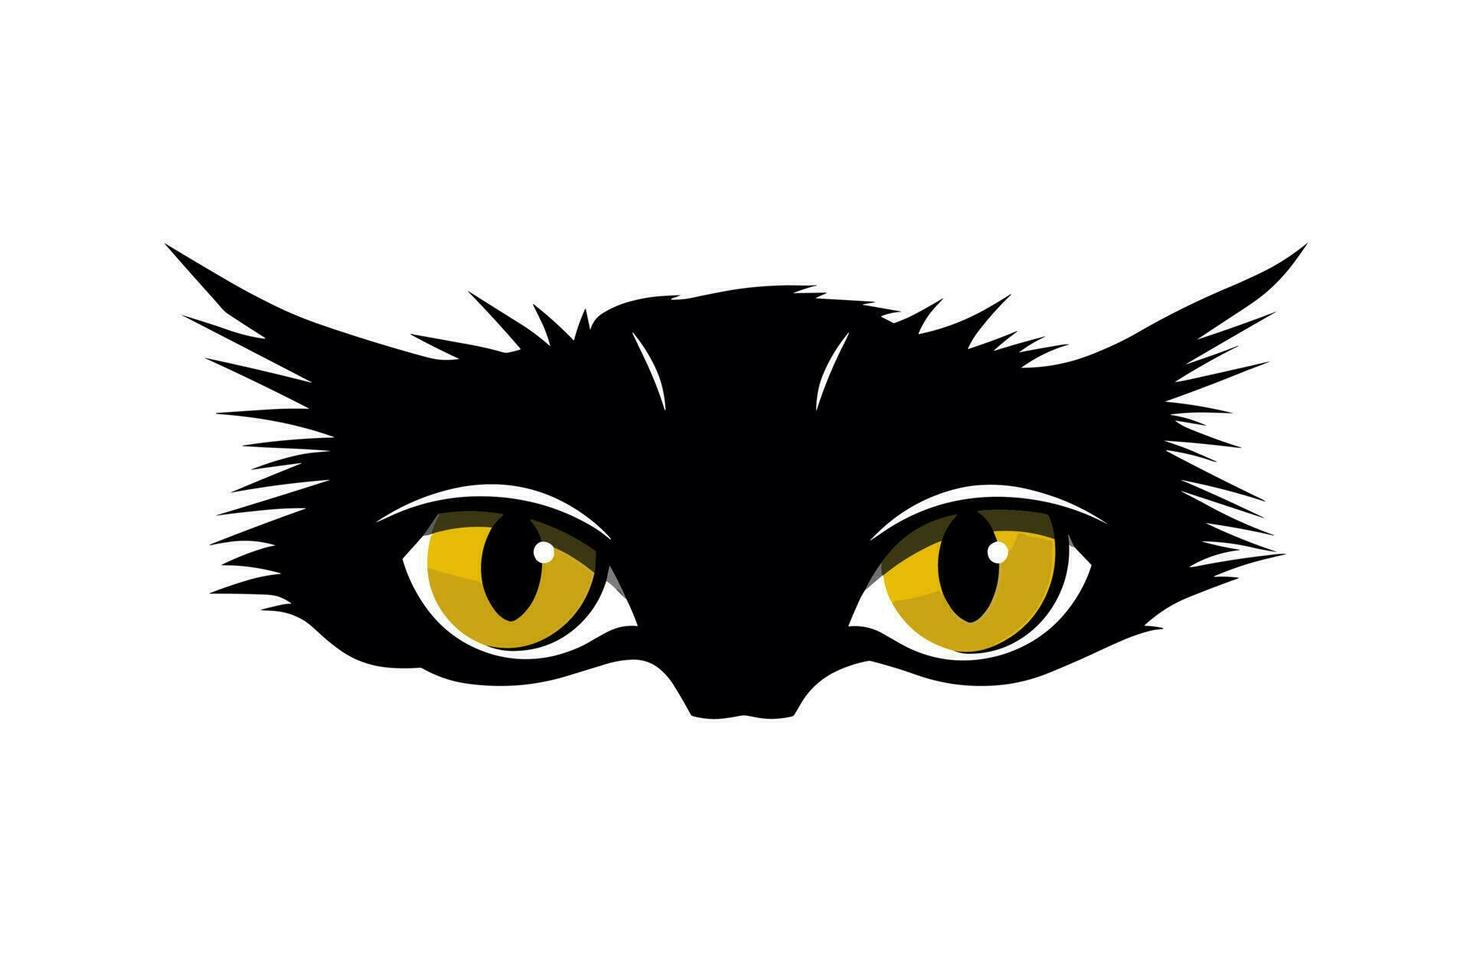 illustration of a cat face vector